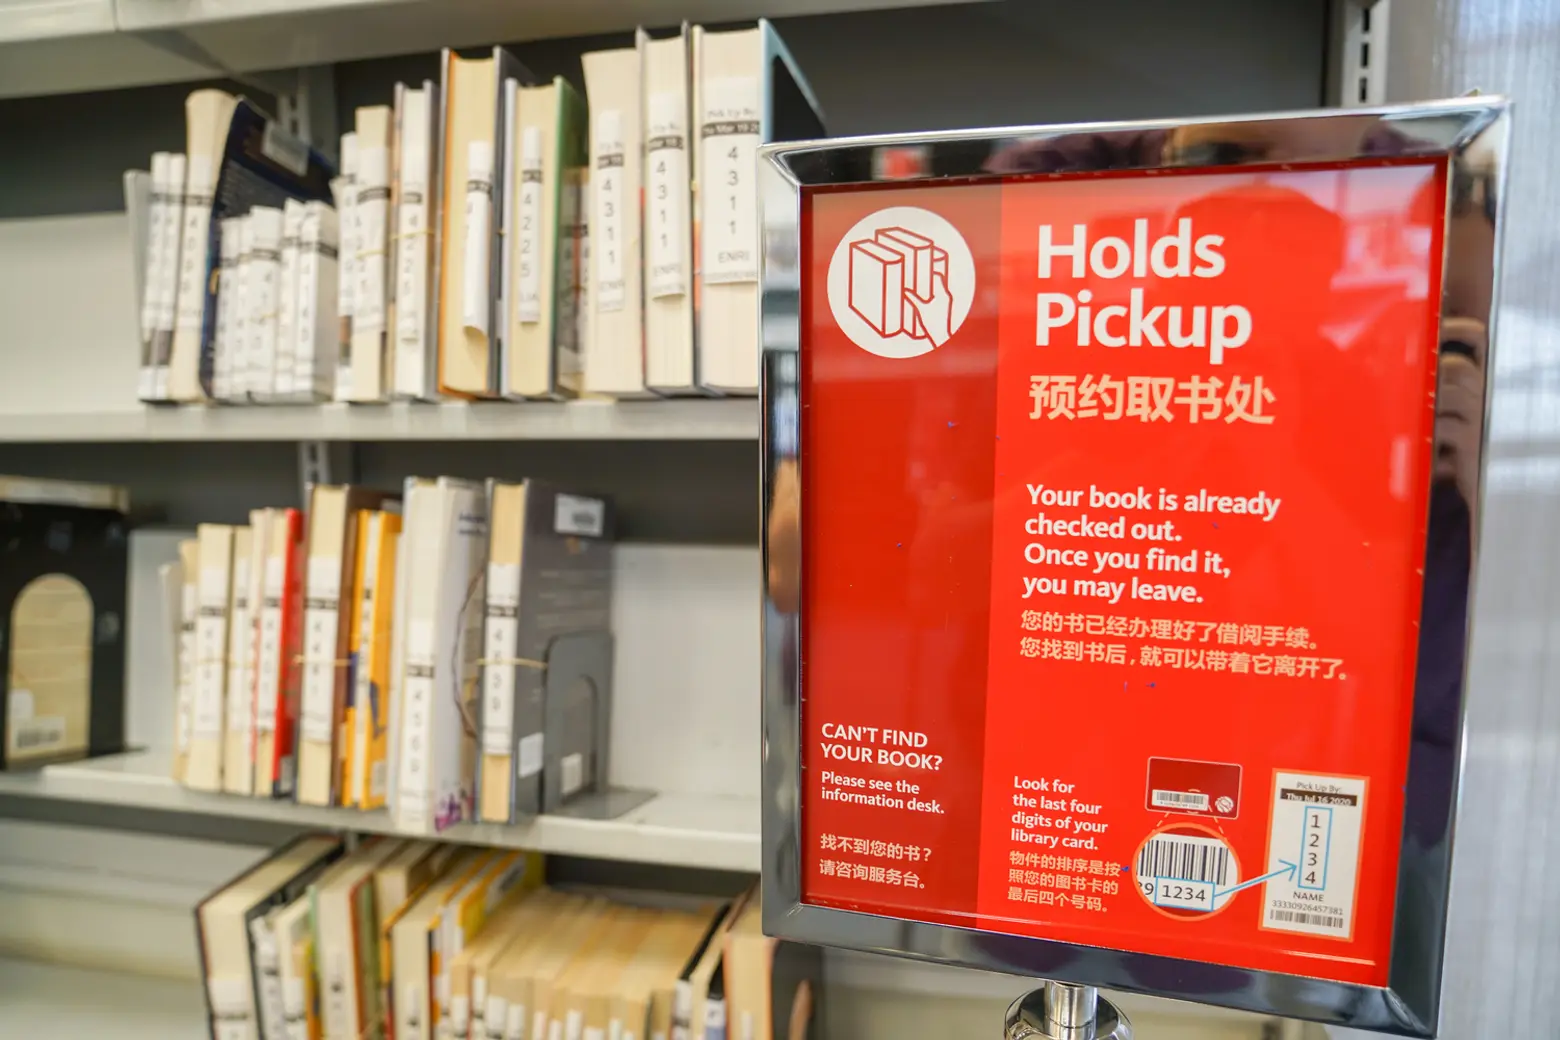 NYC public libraries reopen 22 branches for grab-and-go service